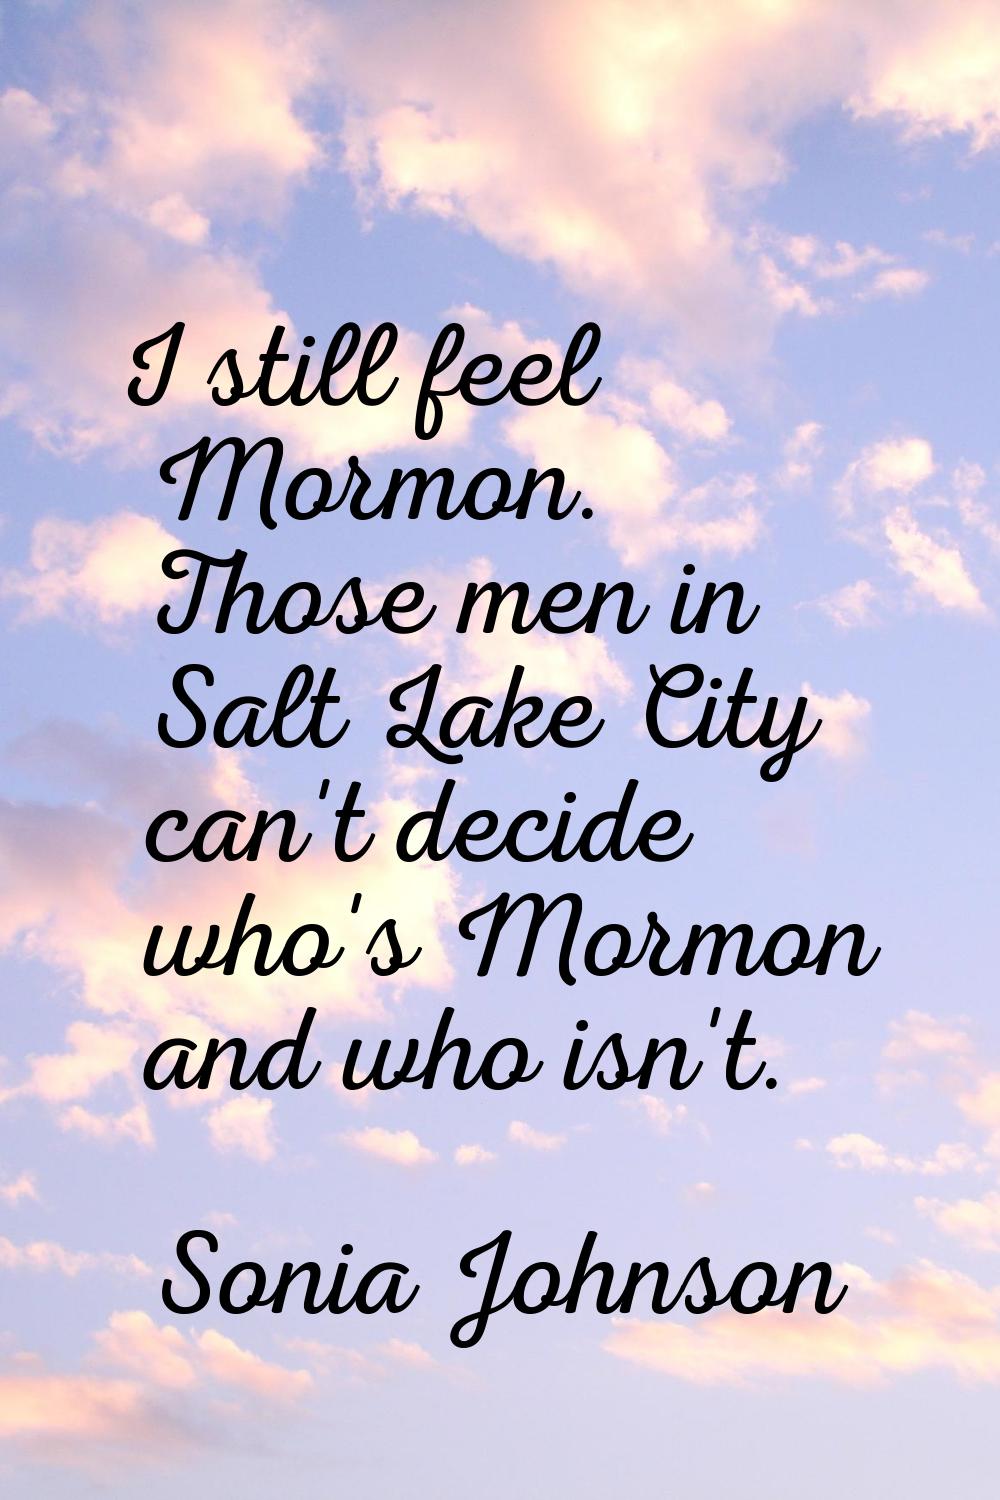 I still feel Mormon. Those men in Salt Lake City can't decide who's Mormon and who isn't.